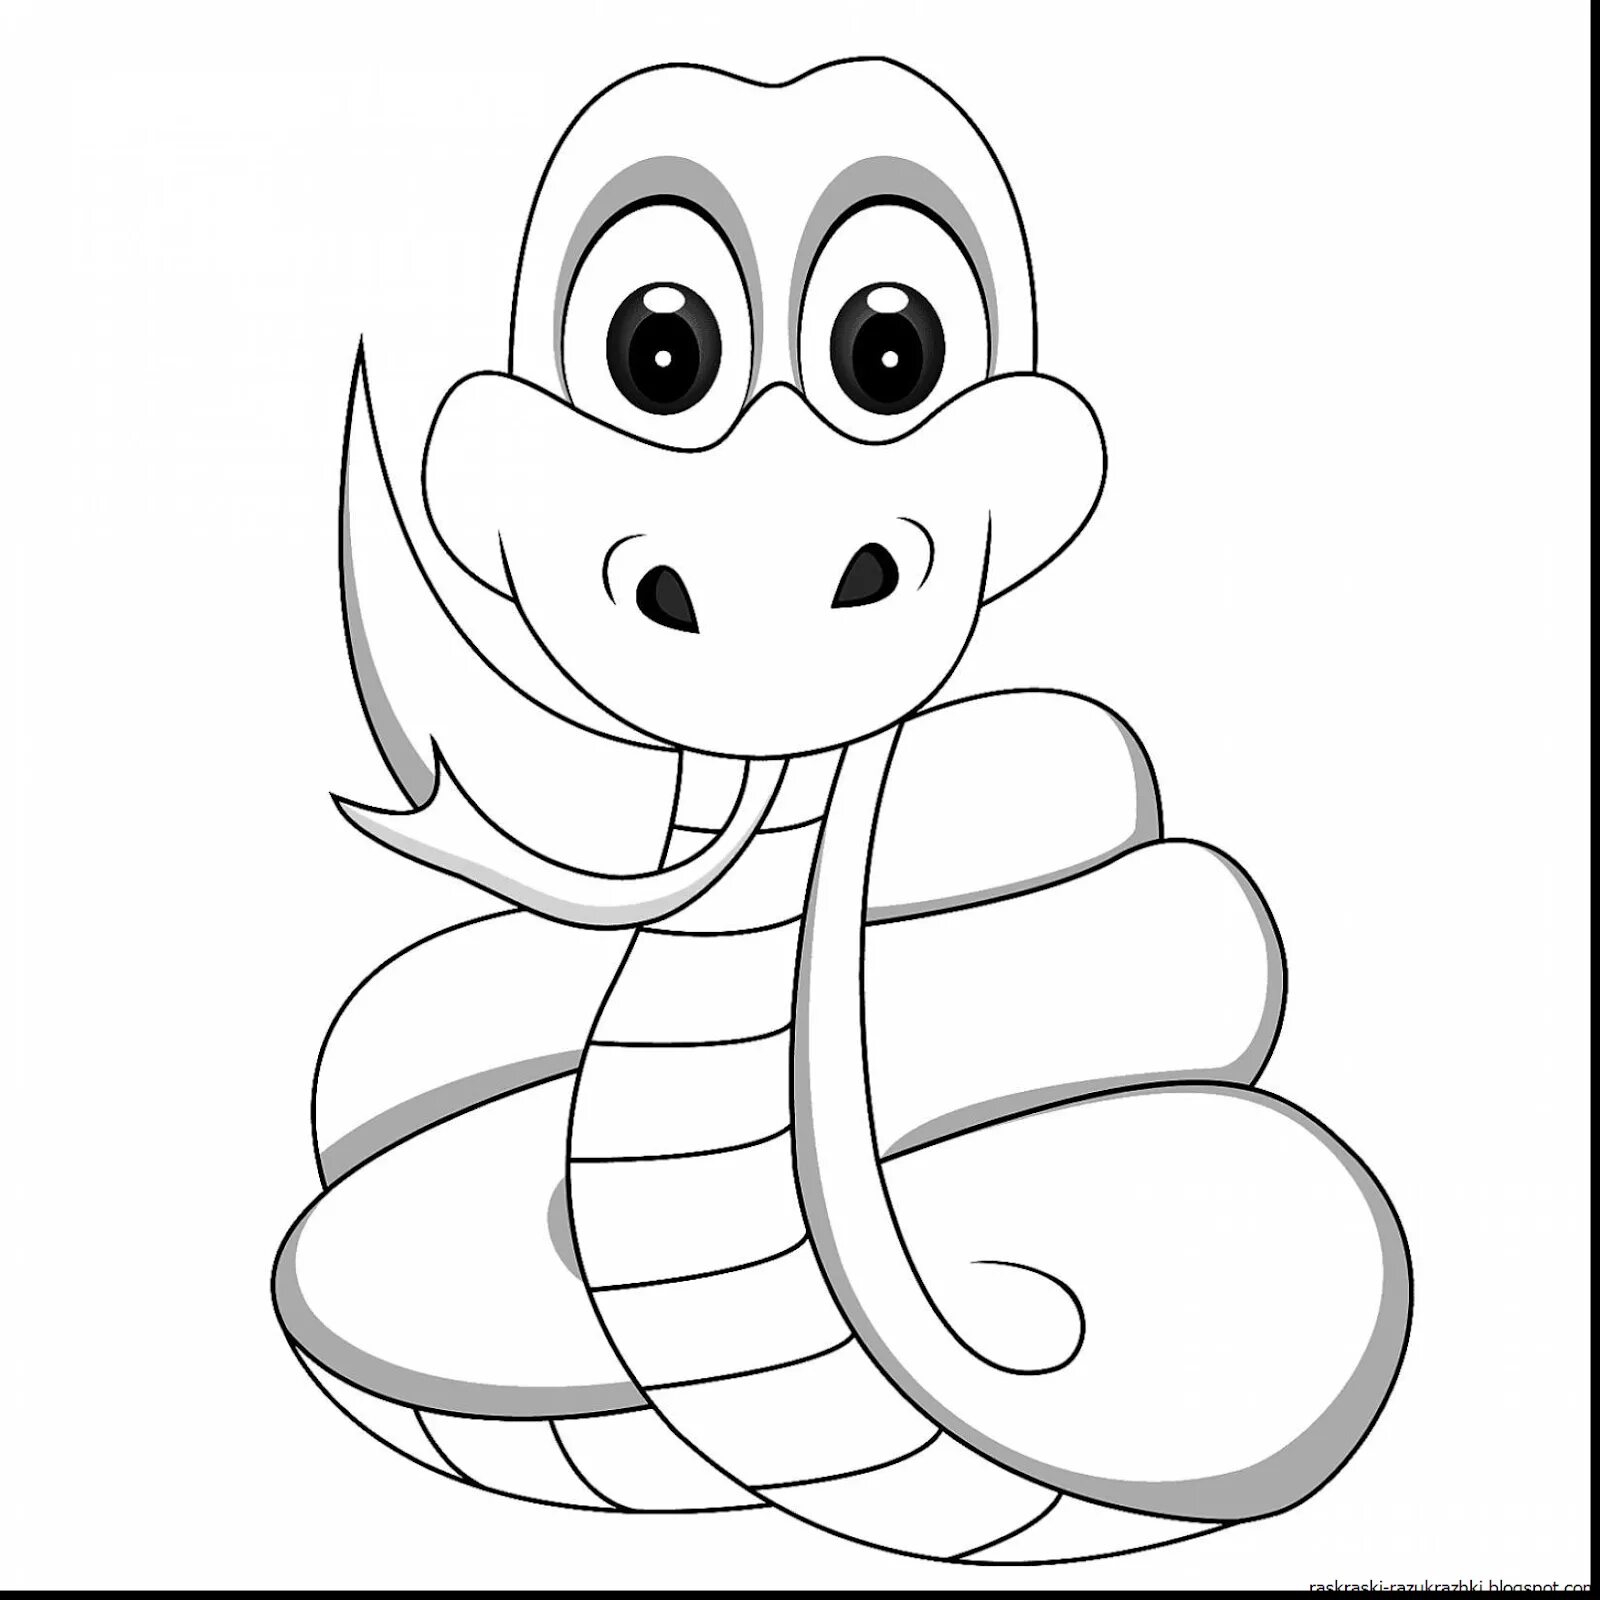 Witty snake coloring book for kids